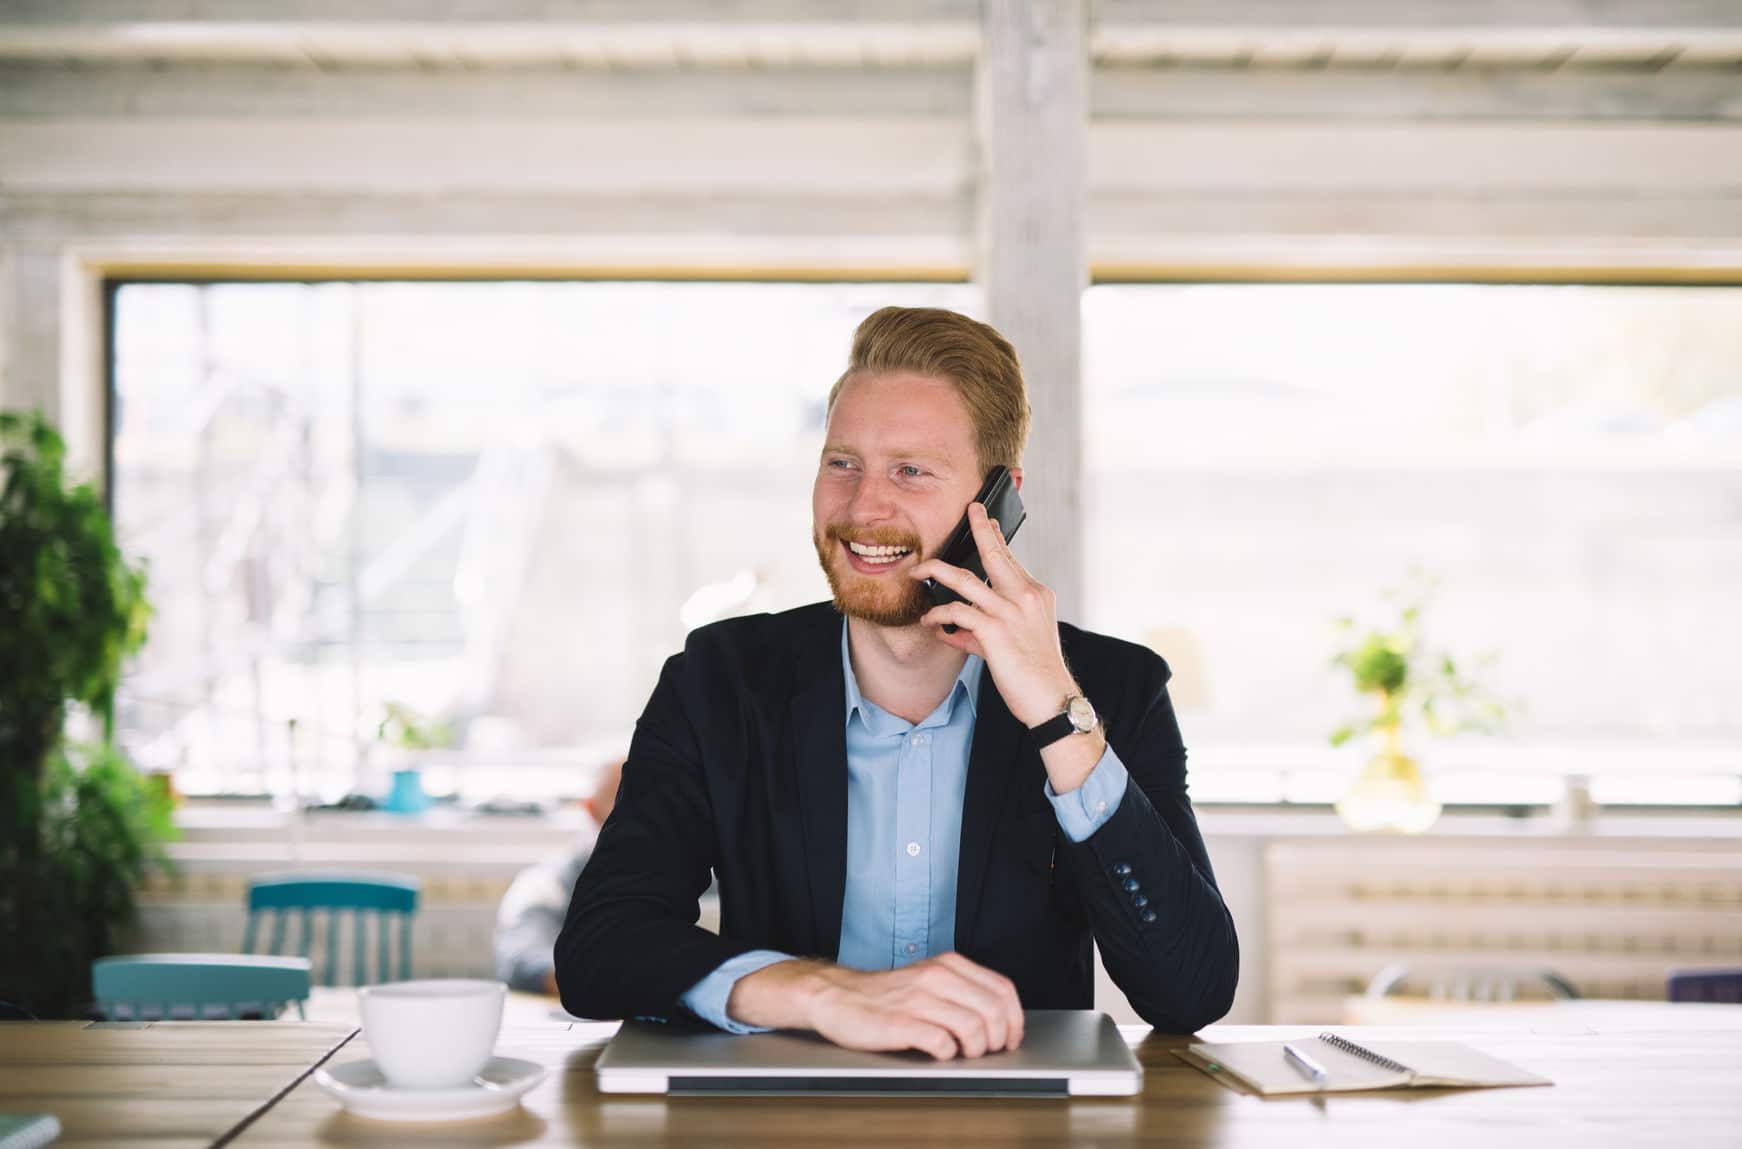 Phone Interview Questions to Ask Job Candidates